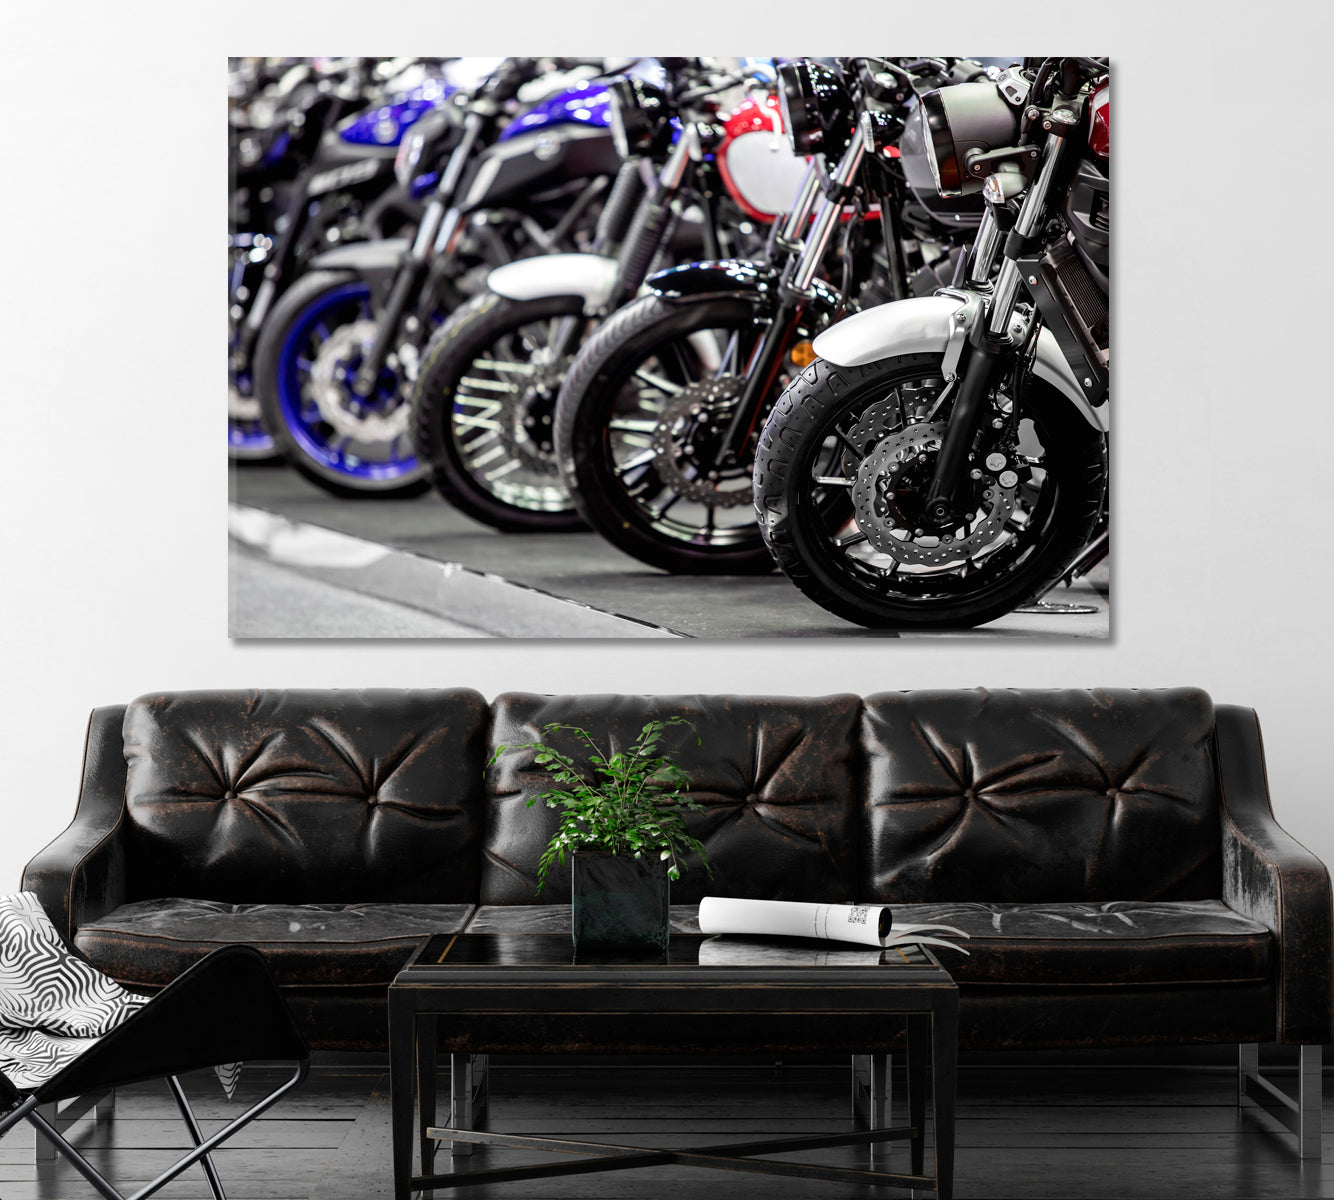 Motorcycles front Wheels Canvas Print ArtLexy 1 Panel 24"x16" inches 